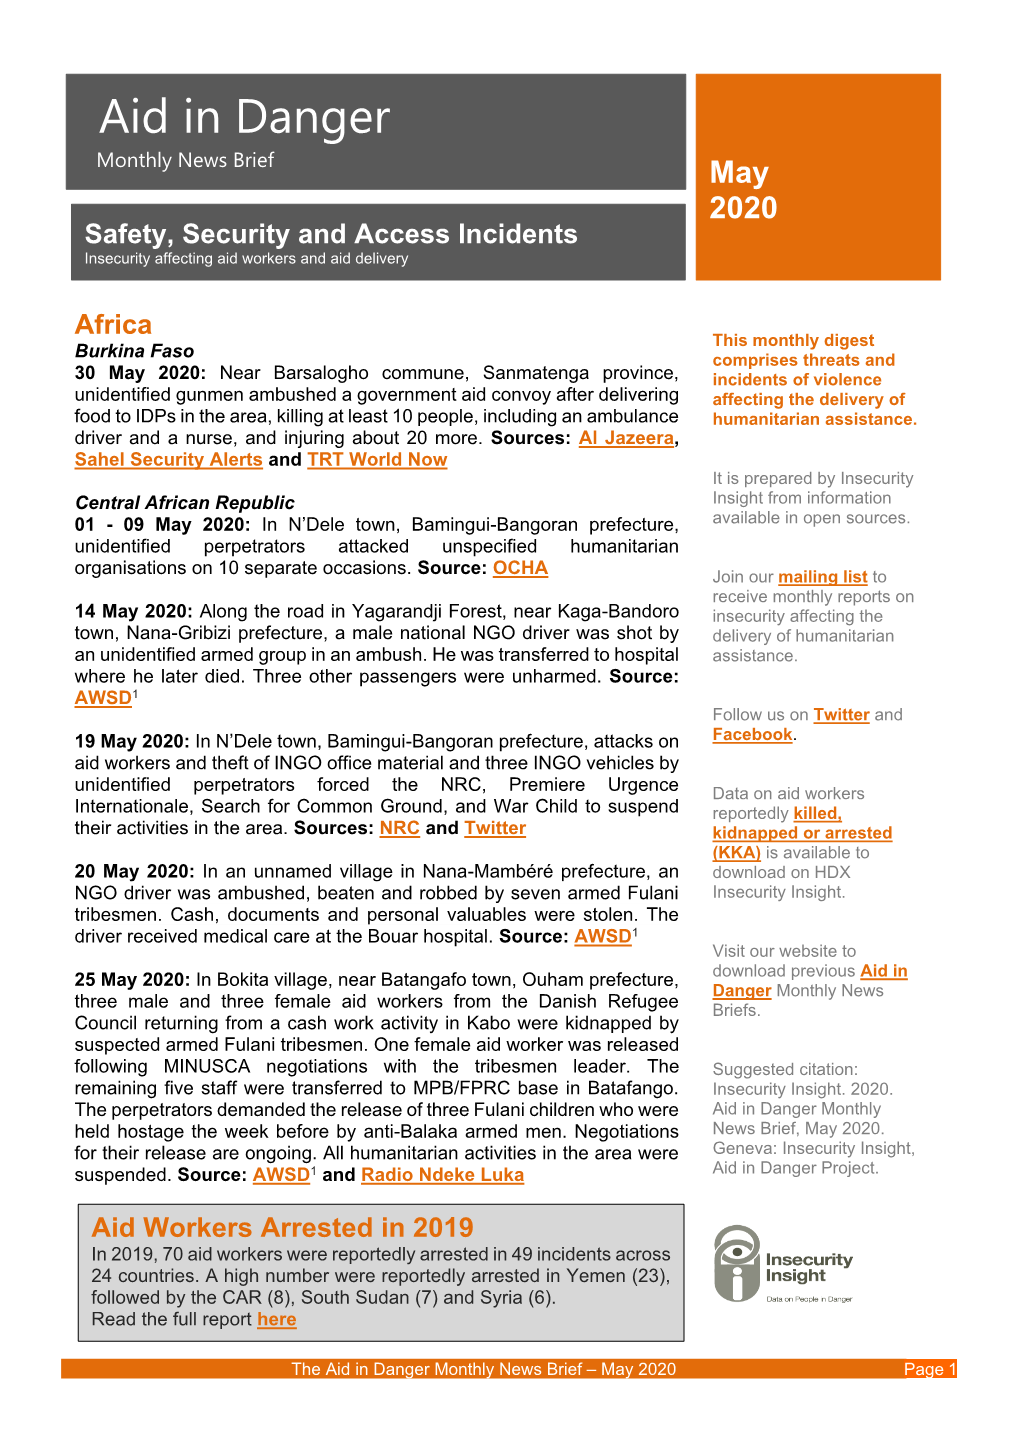 The Aid in Danger Monthly News Brief